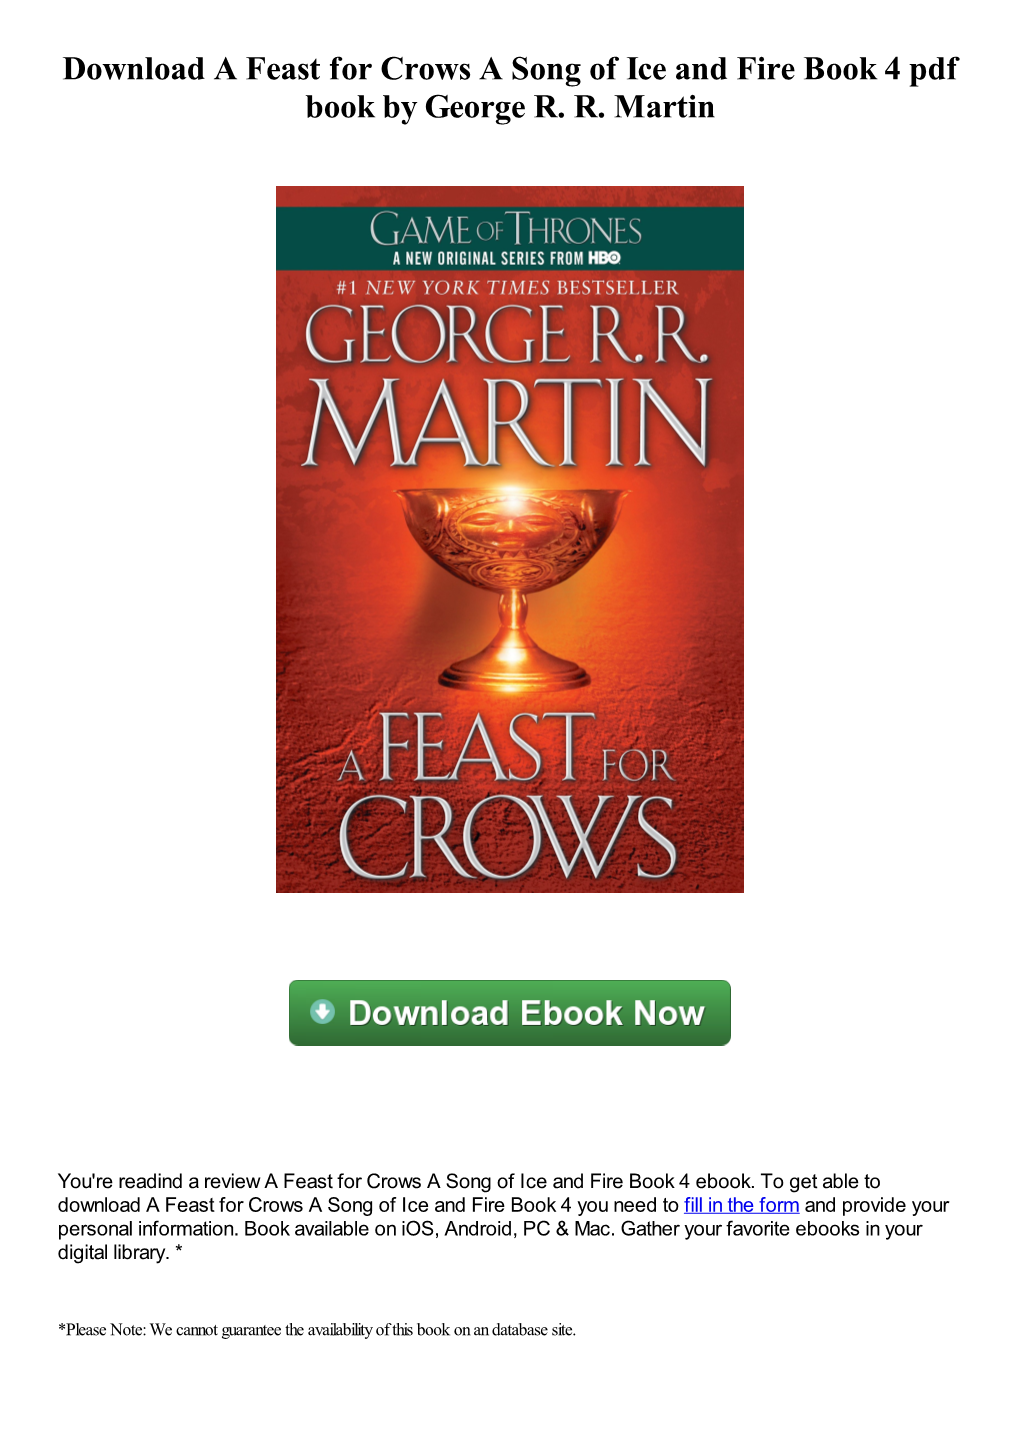 Download a Feast for Crows a Song of Ice and Fire Book 4 Pdf Book by George R